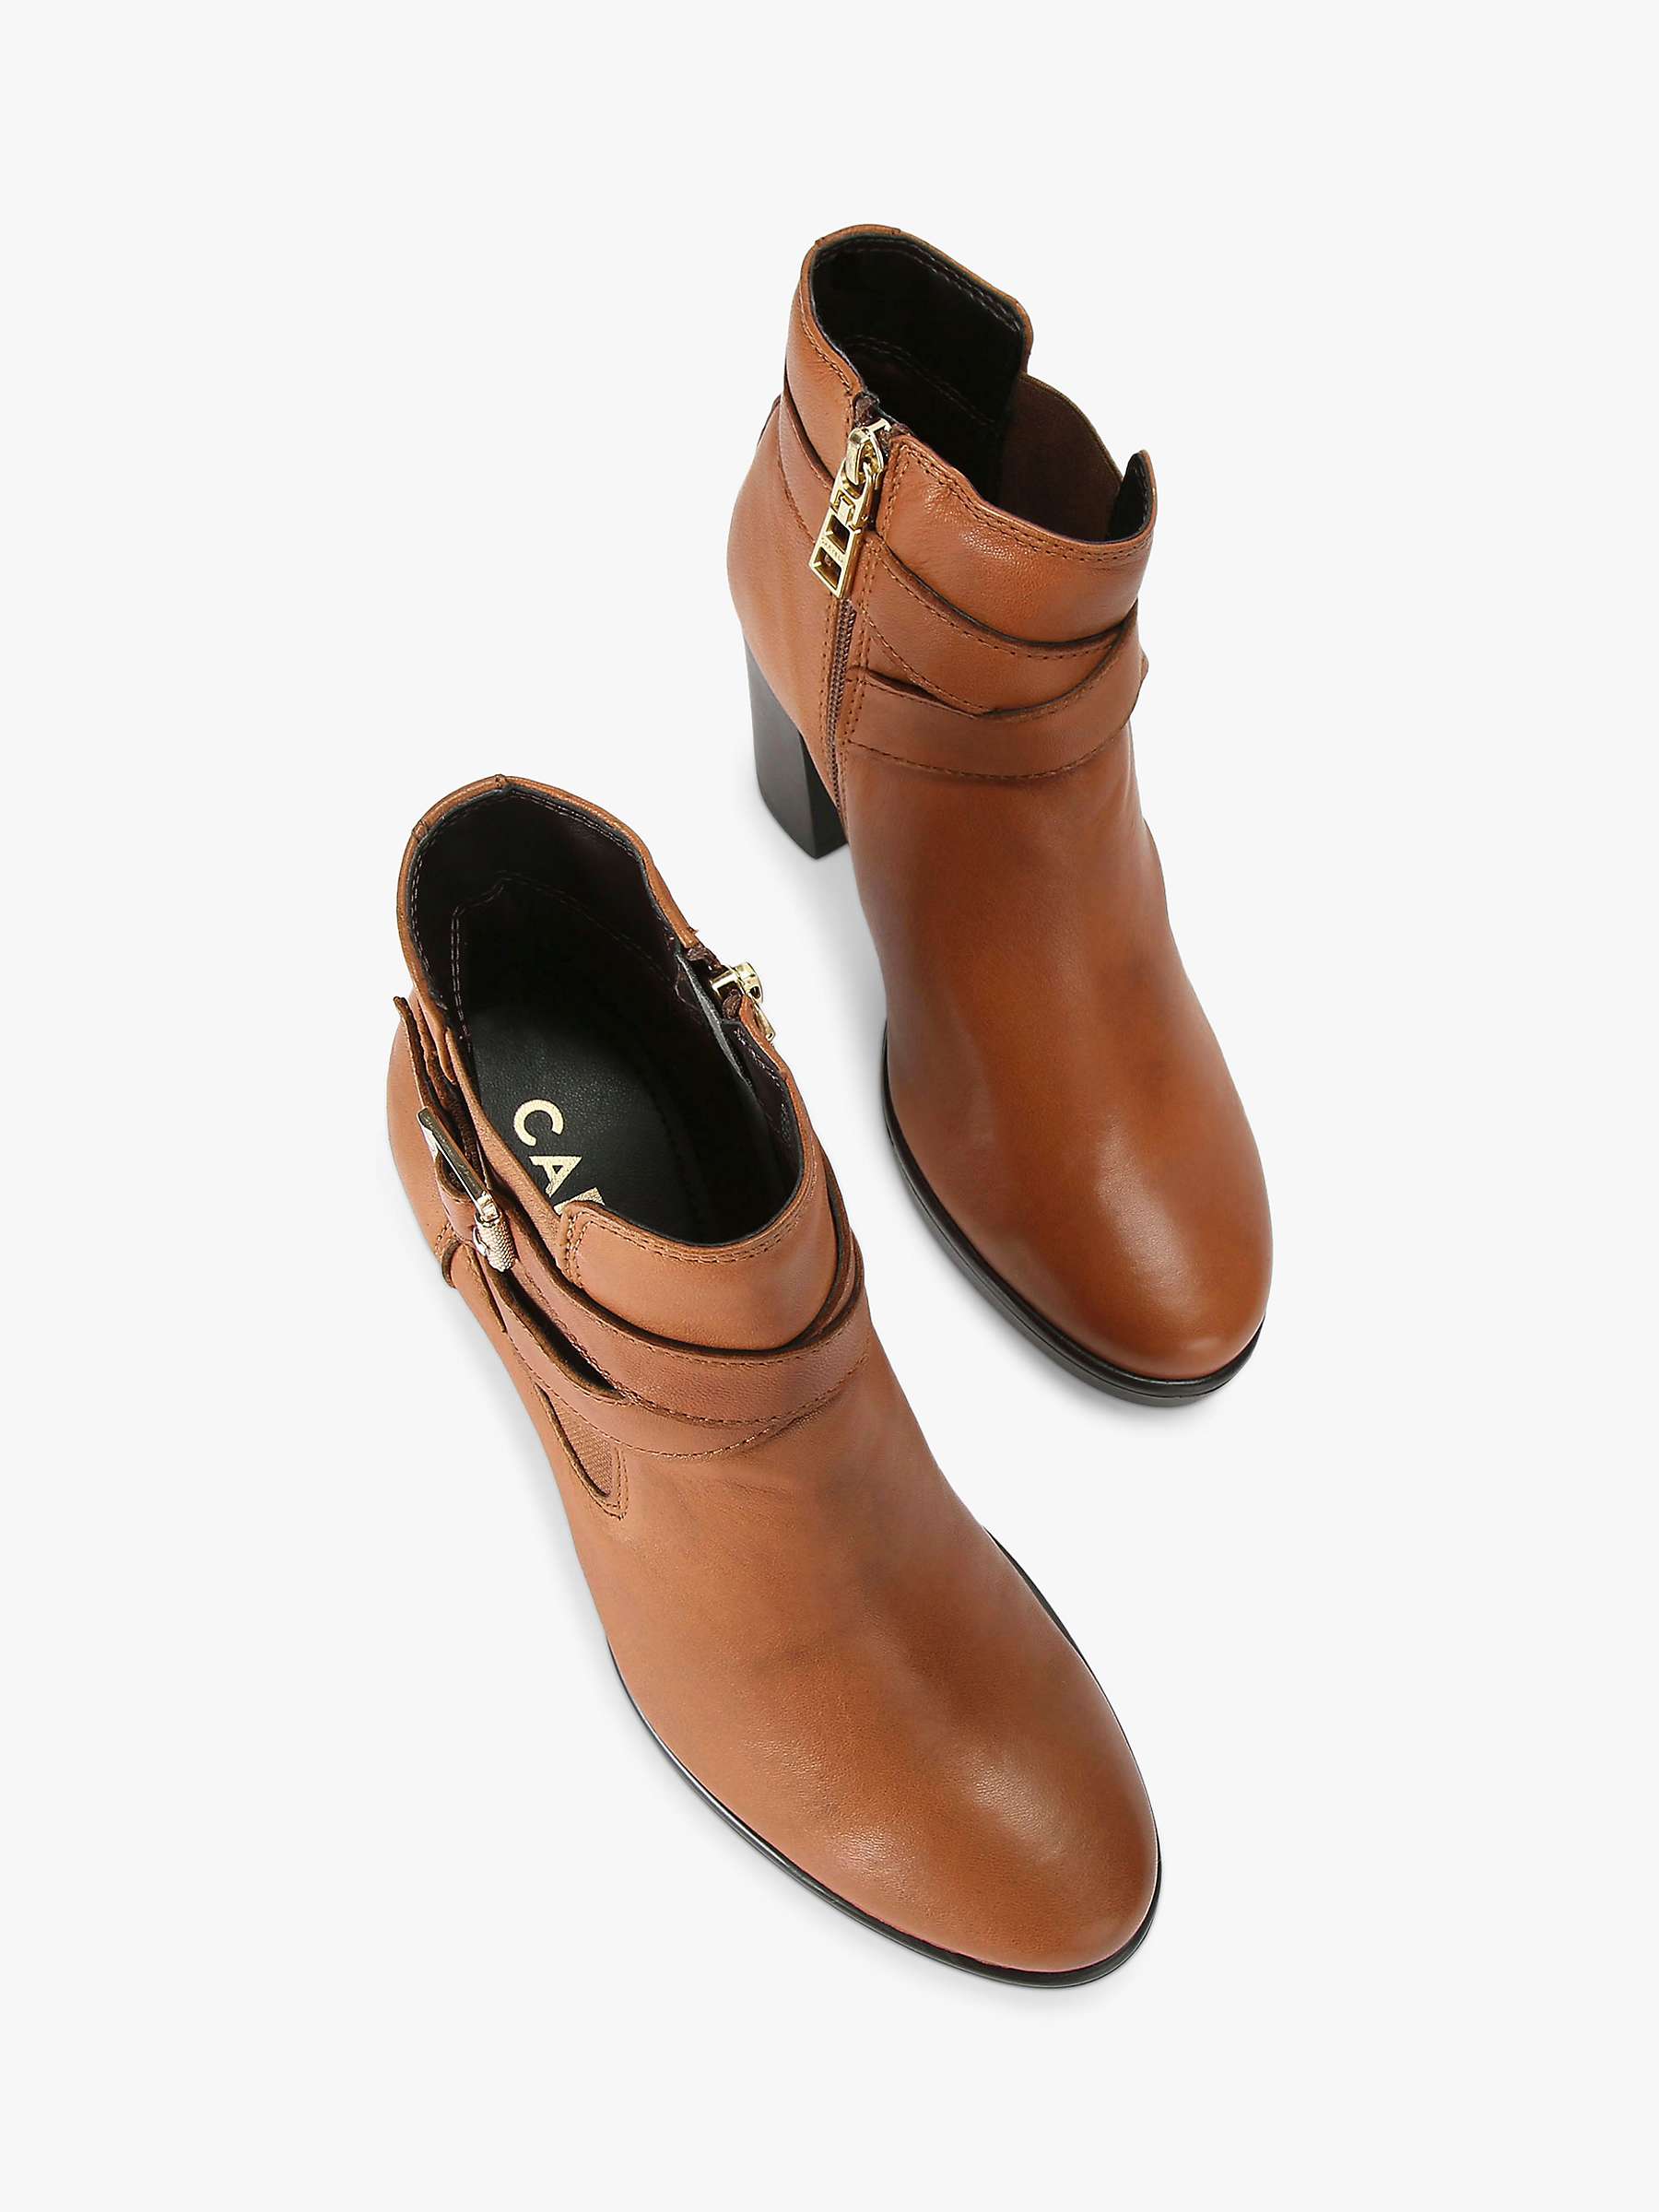 Buy Carvela Silver 2 Leather Ankle Boots, Brown Tan Online at johnlewis.com